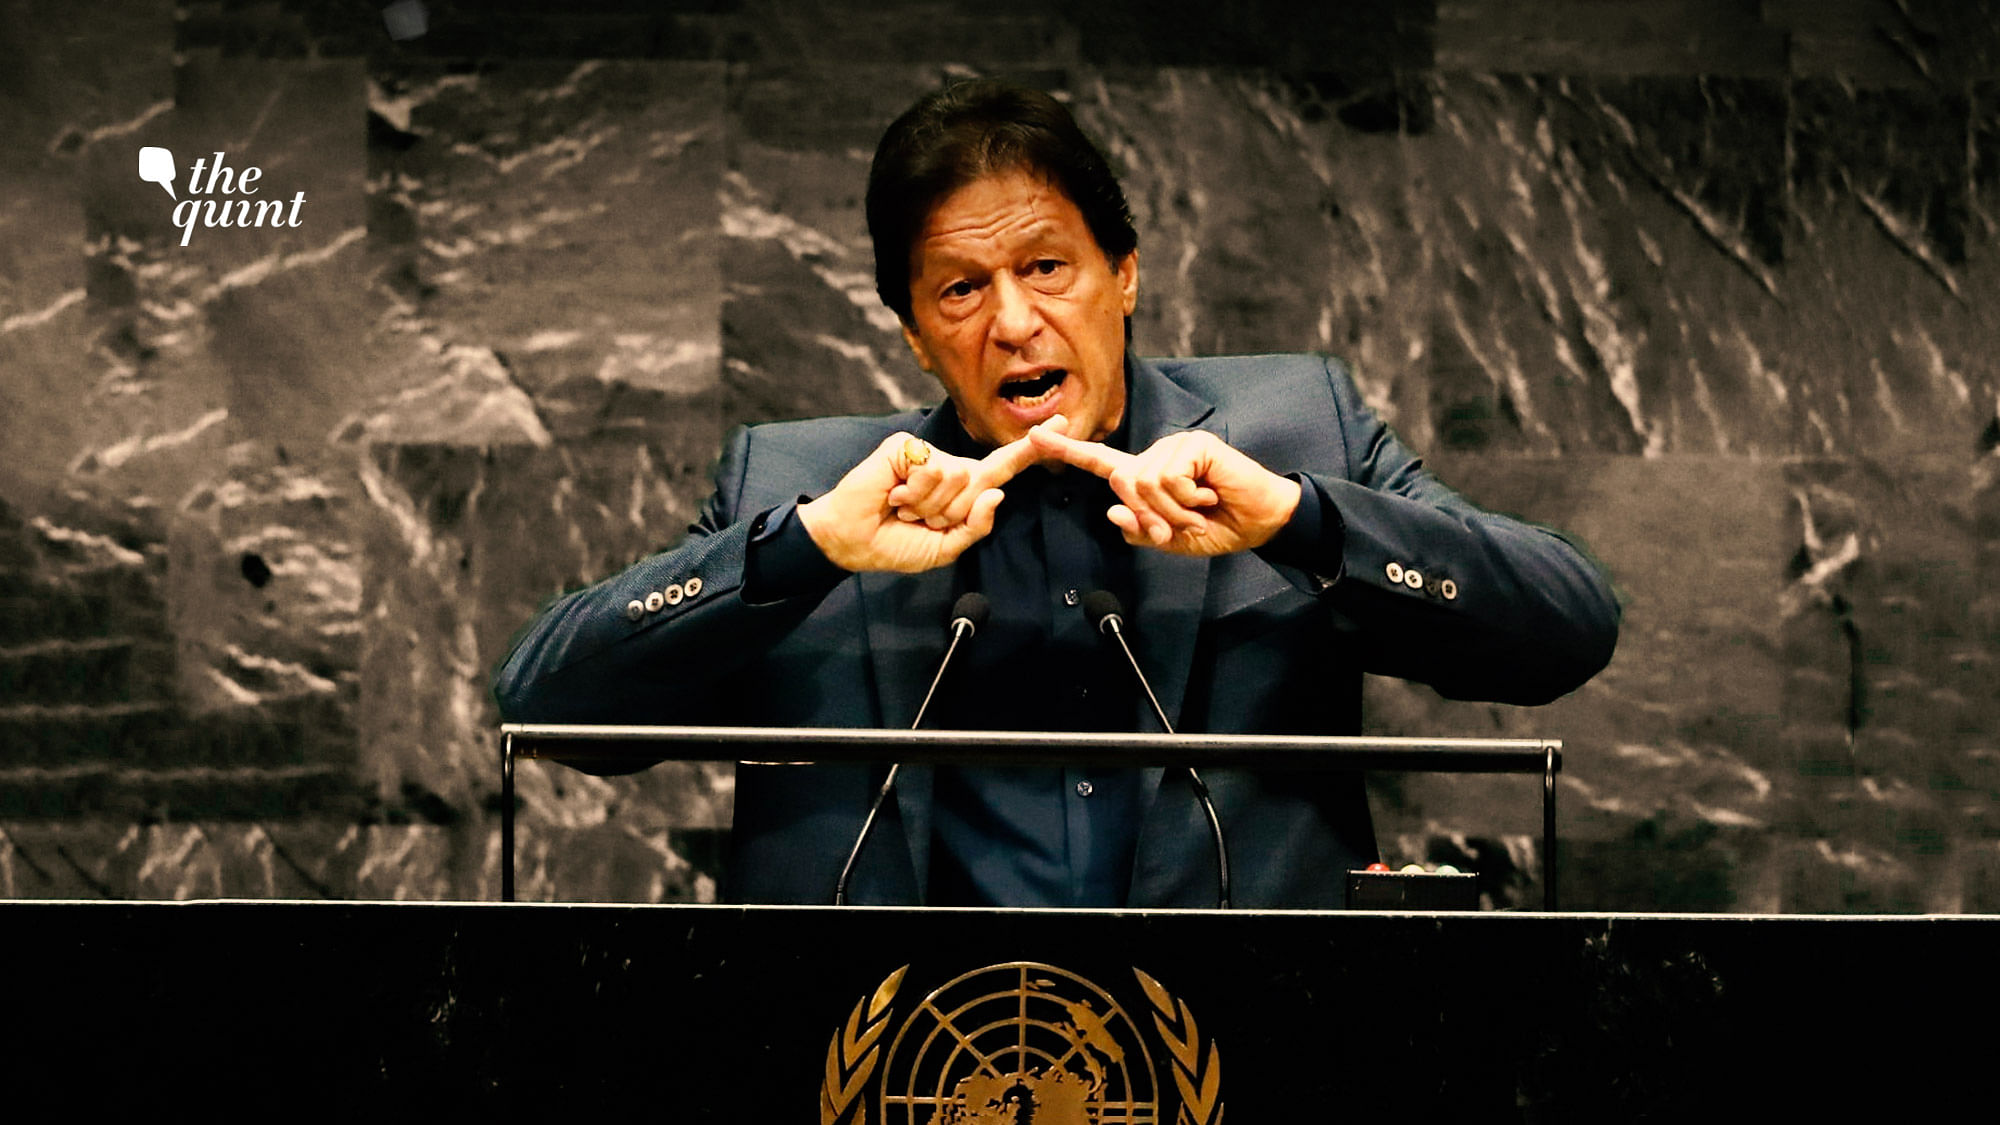 Image of Pakistan PM Imran Khan at the UNGA on 27 September 2019, used for representational purposes.